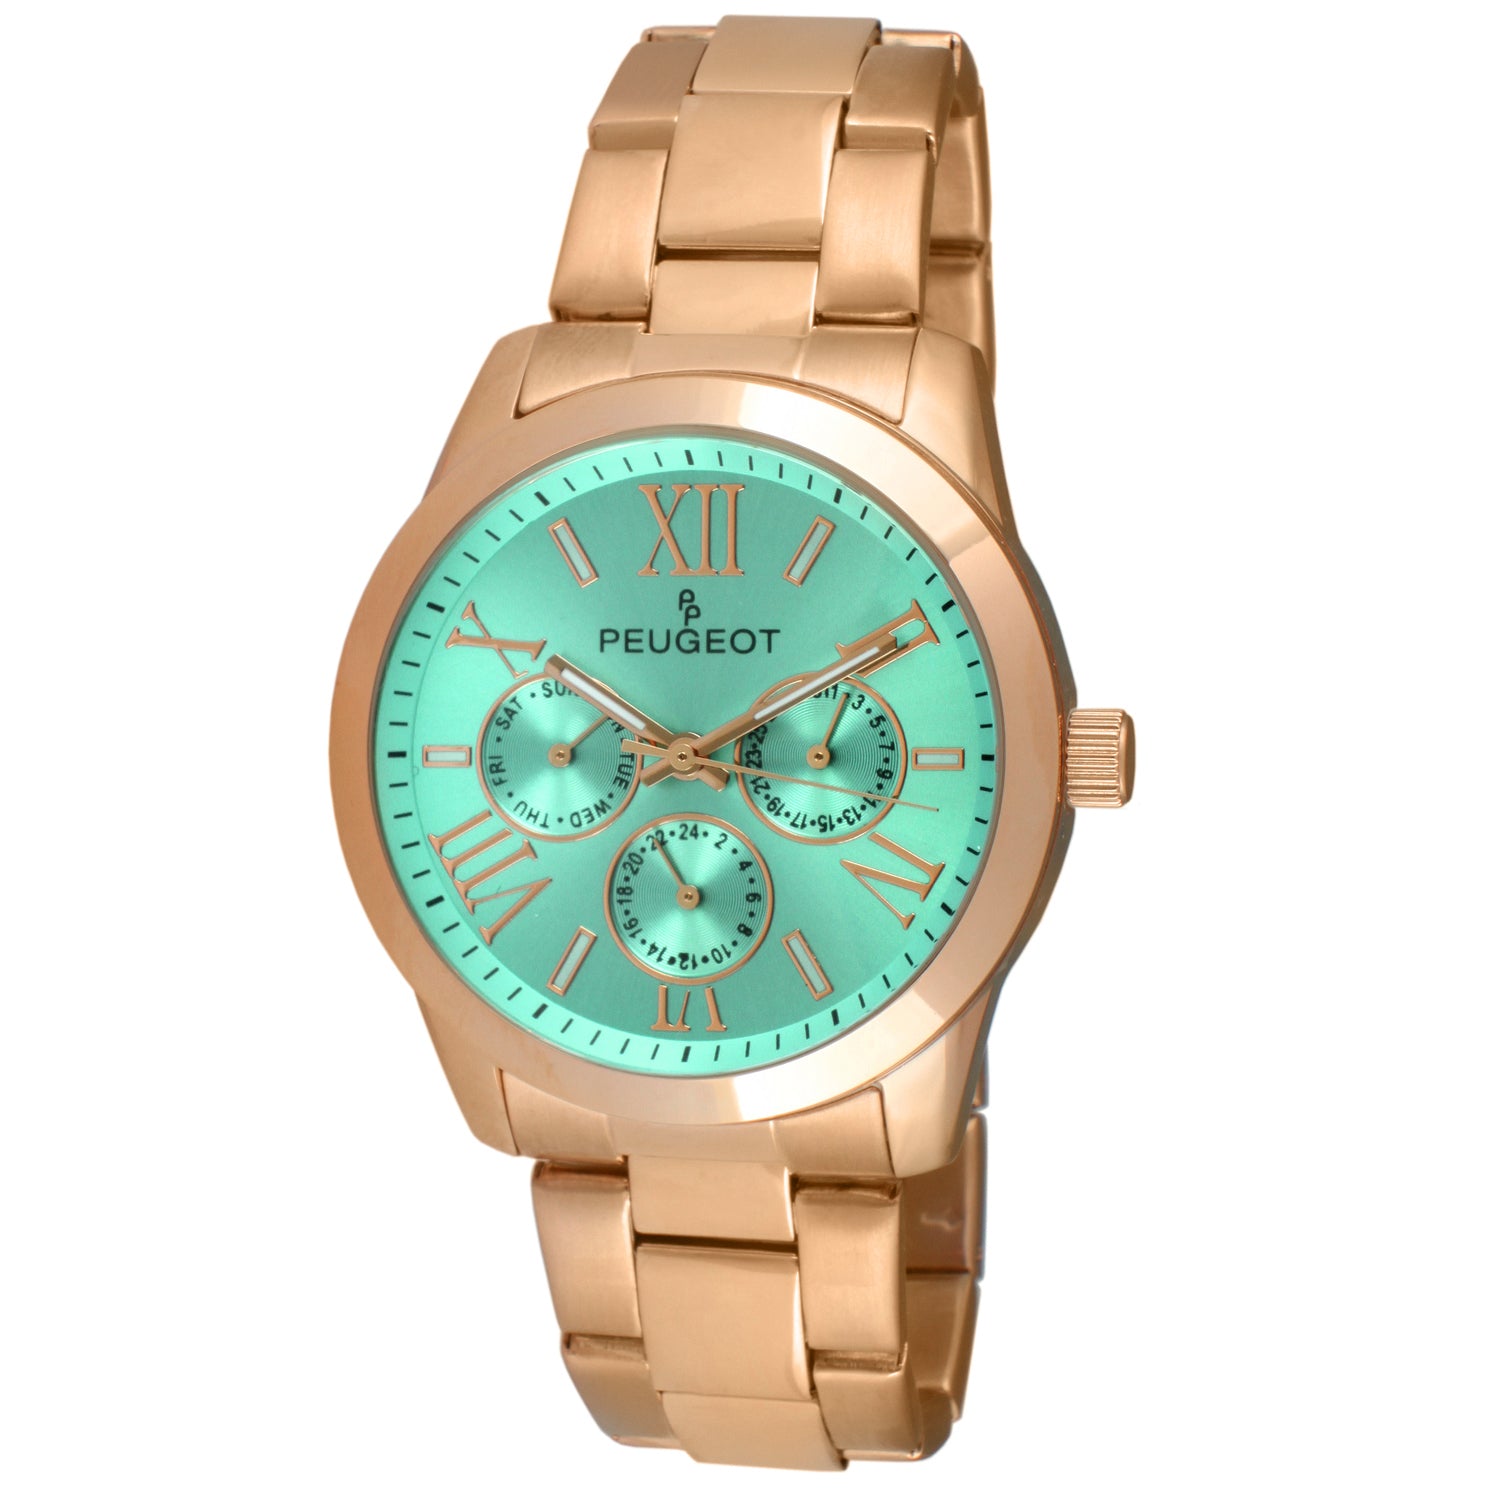 Peugeot Women's Multi-Function Watch Rose Gold Bracelet and